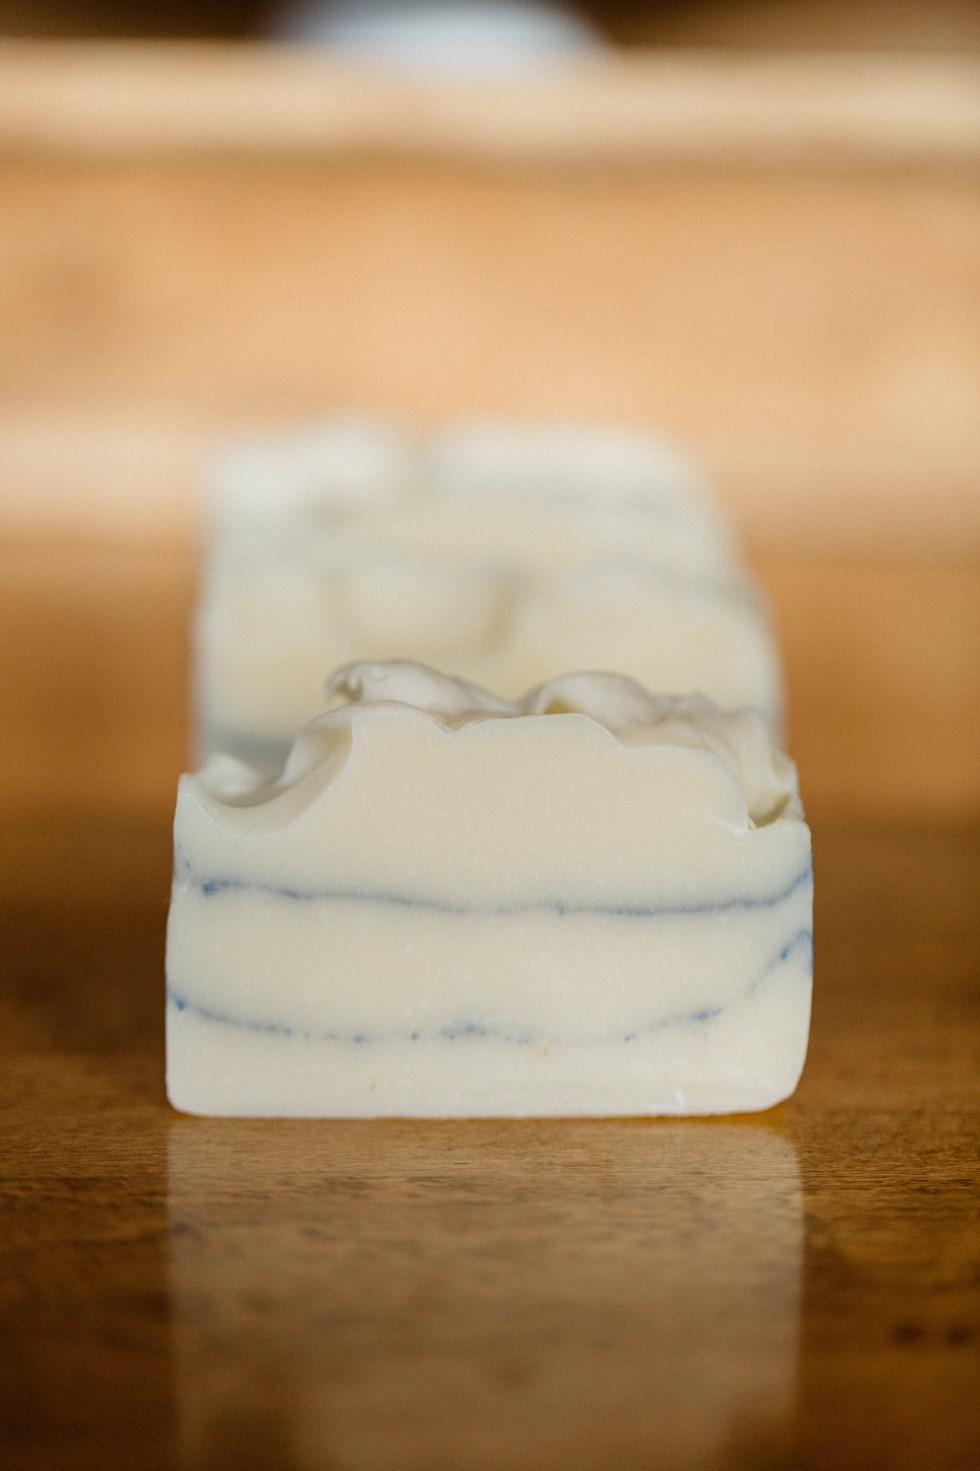 Can't make it to a sale? There are lots of options. Orders can be placed at any time with pick-up available and shipping beginning on Saturday, December 12th to accommodate further curing of the soap.